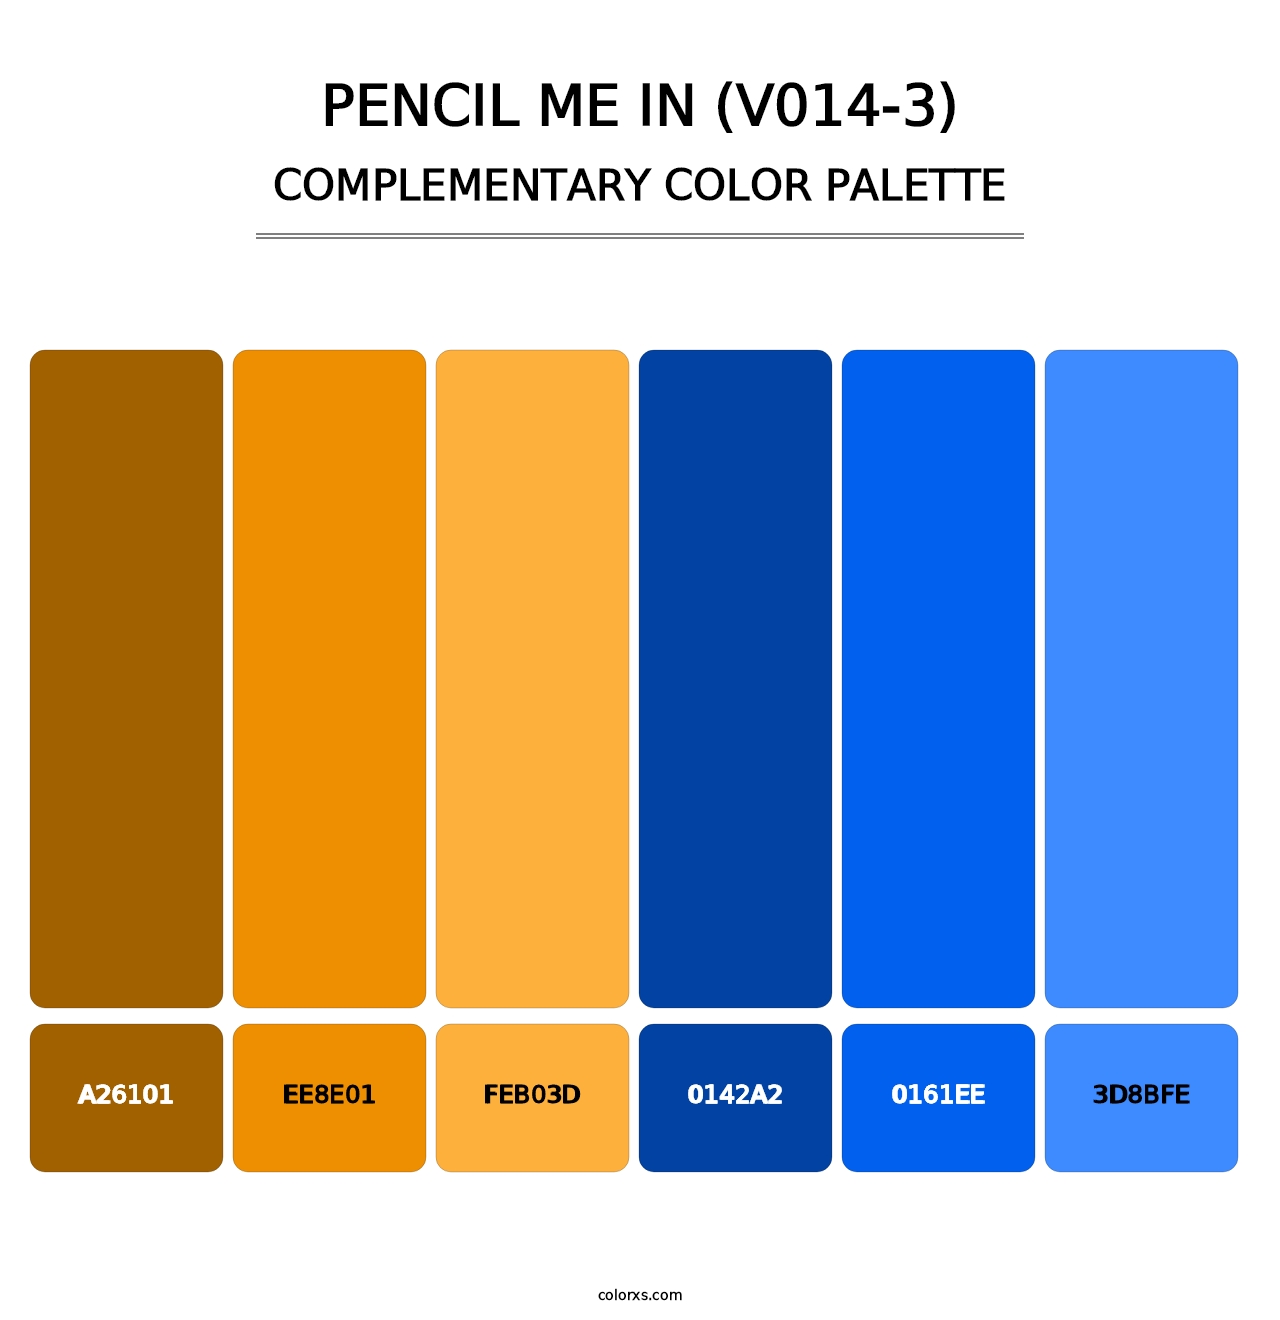 Pencil Me In (V014-3) - Complementary Color Palette